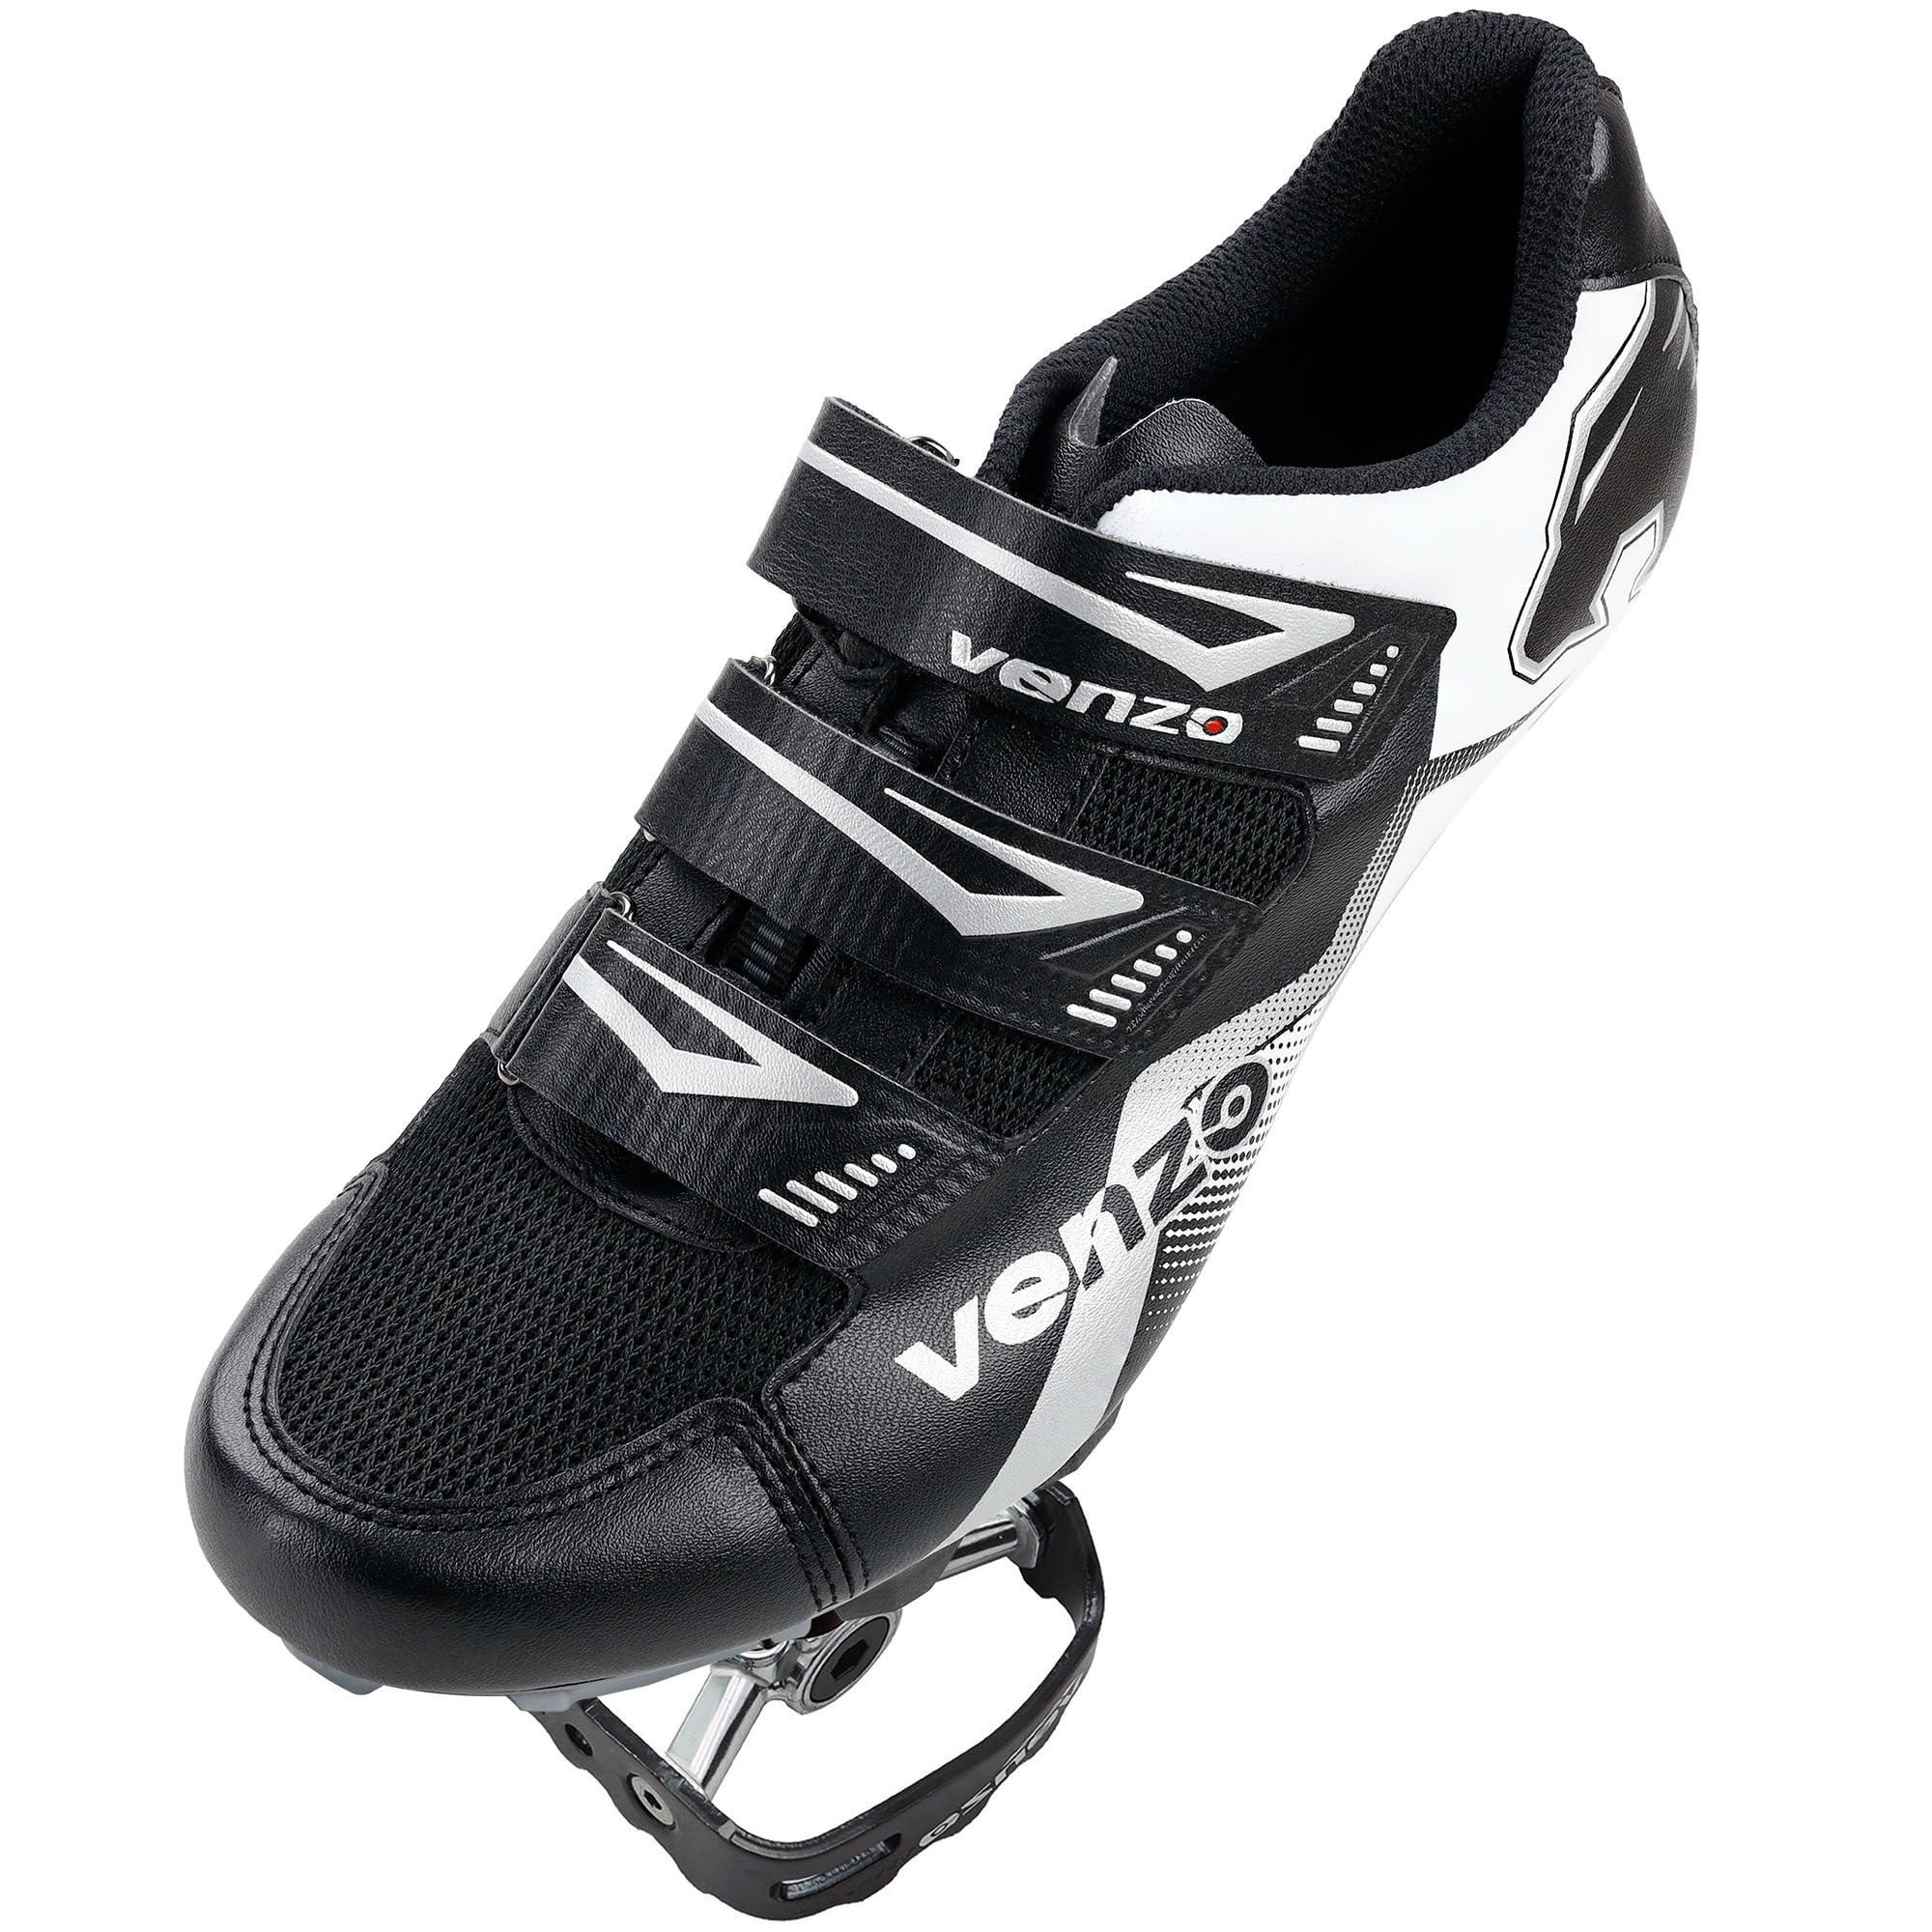 Venzo Mountain Bike Bicycle Cycling Shimano SPD Shoes Multi-Use Pedals 45 